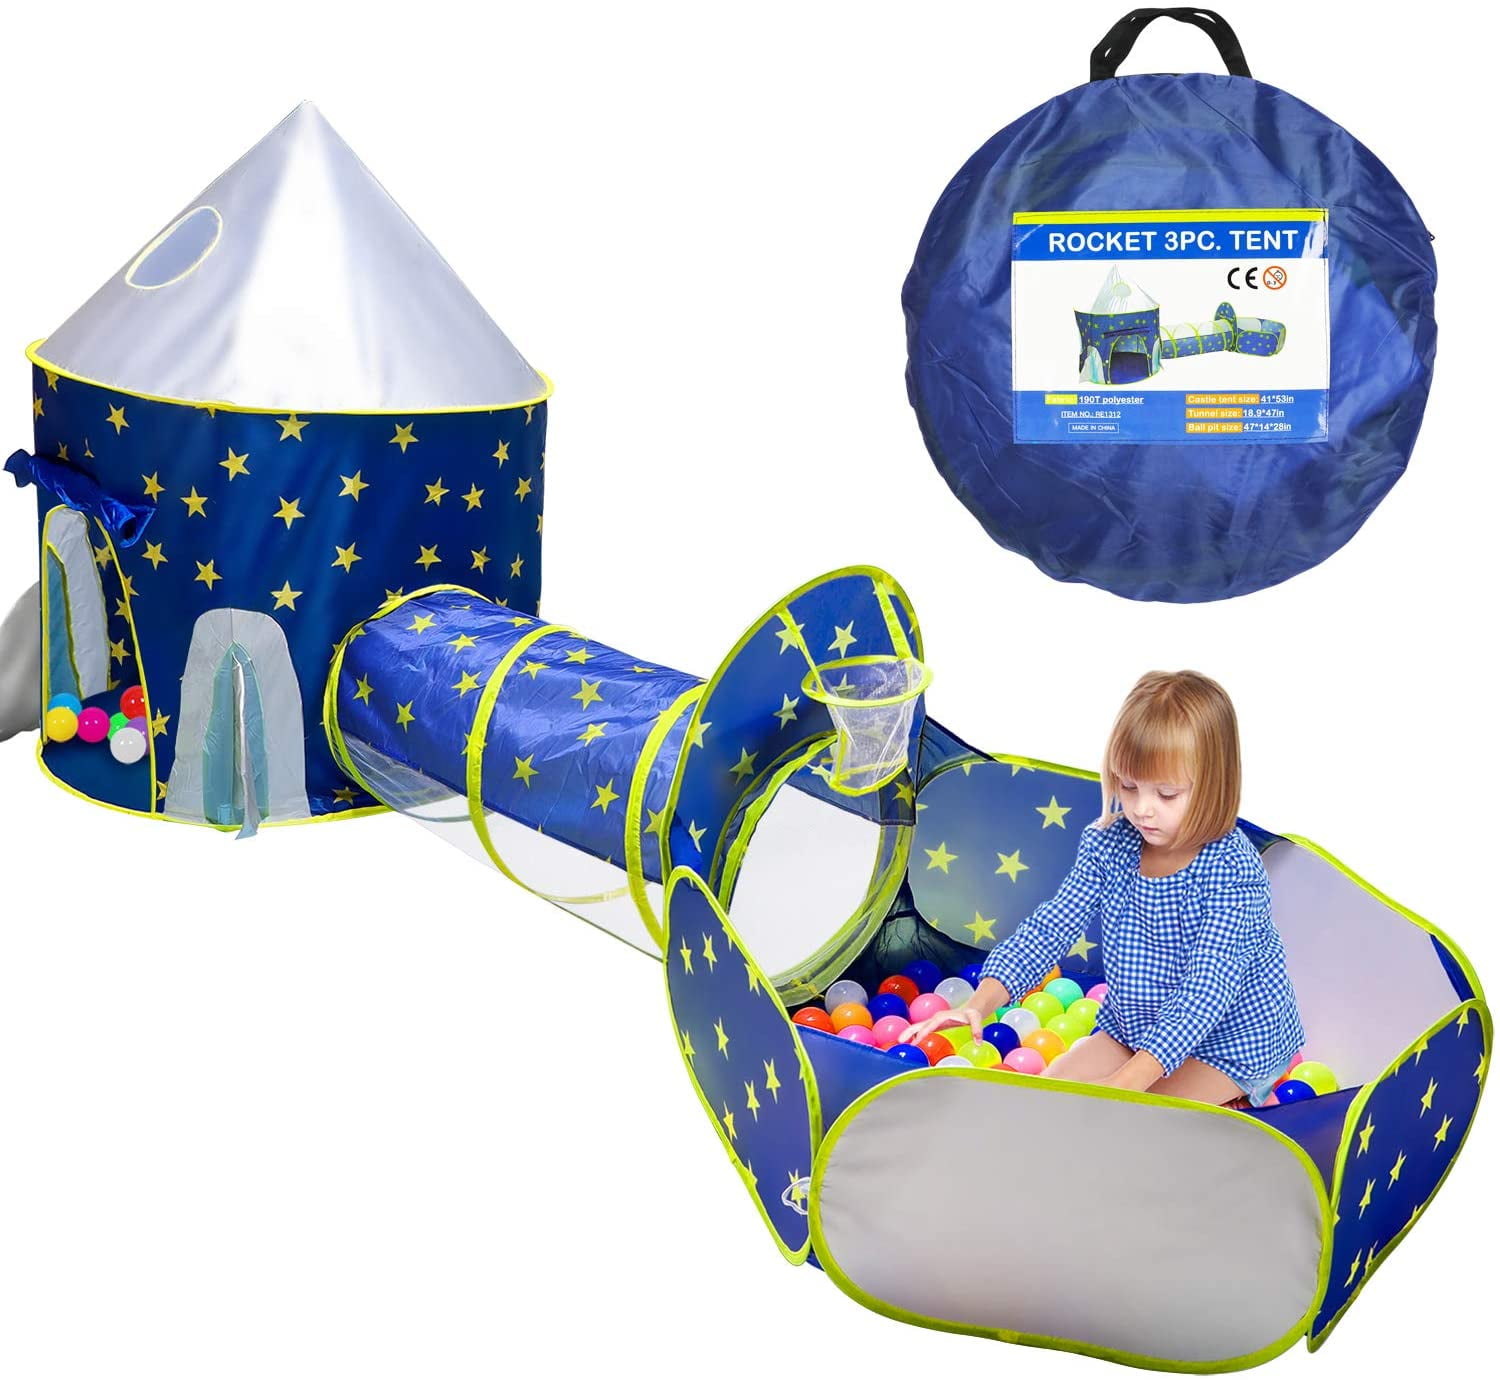 Details about   Kids Play Tent 3pcs Pop Up Tent Toddlers Crawl Tunnel Baby Playhouse Ball Pit 